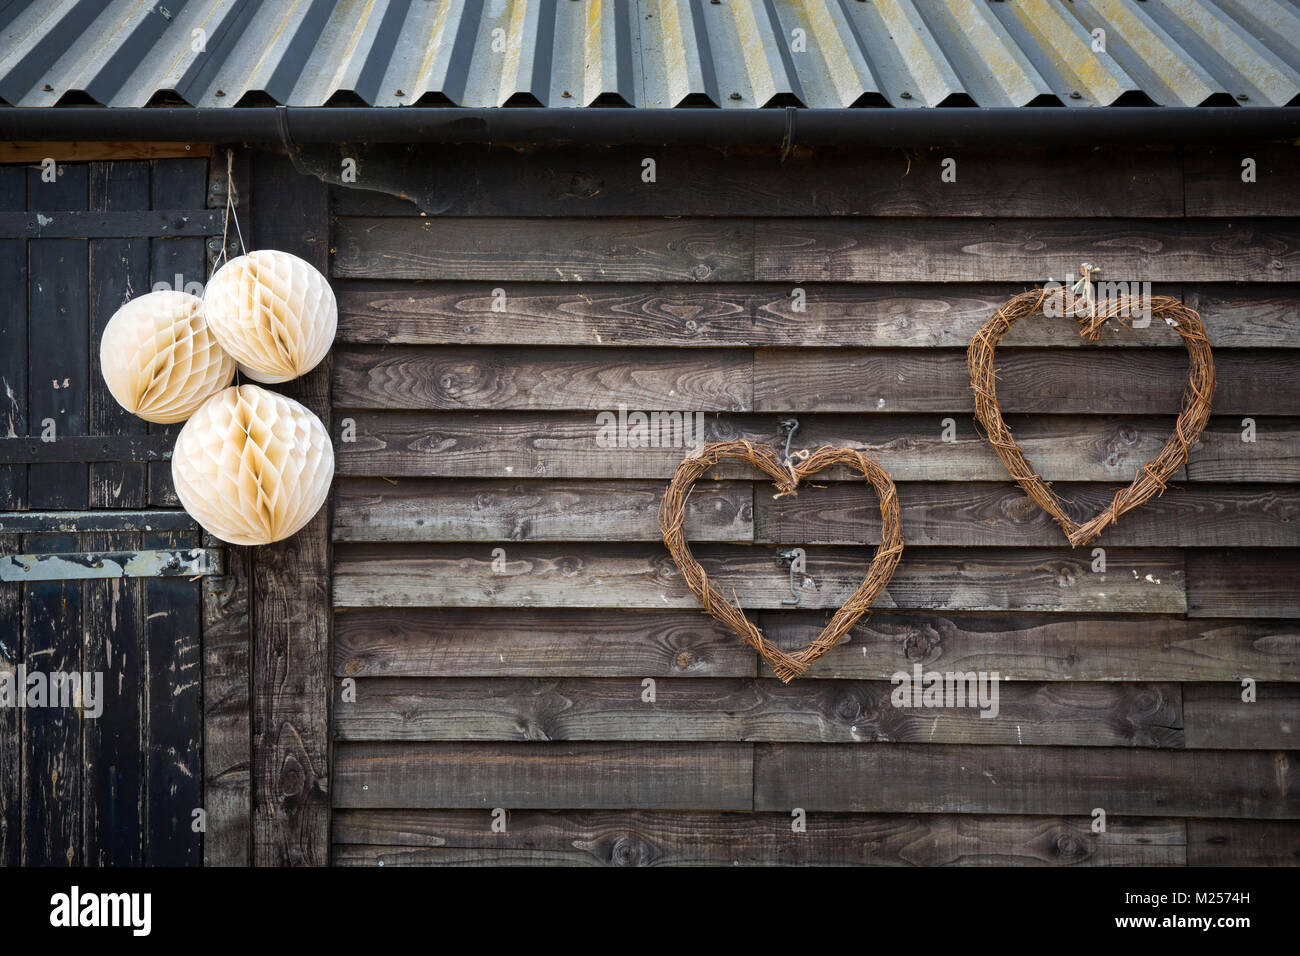 Barn exterior with decorated with paper decorations and wicker hearts Stock Photo